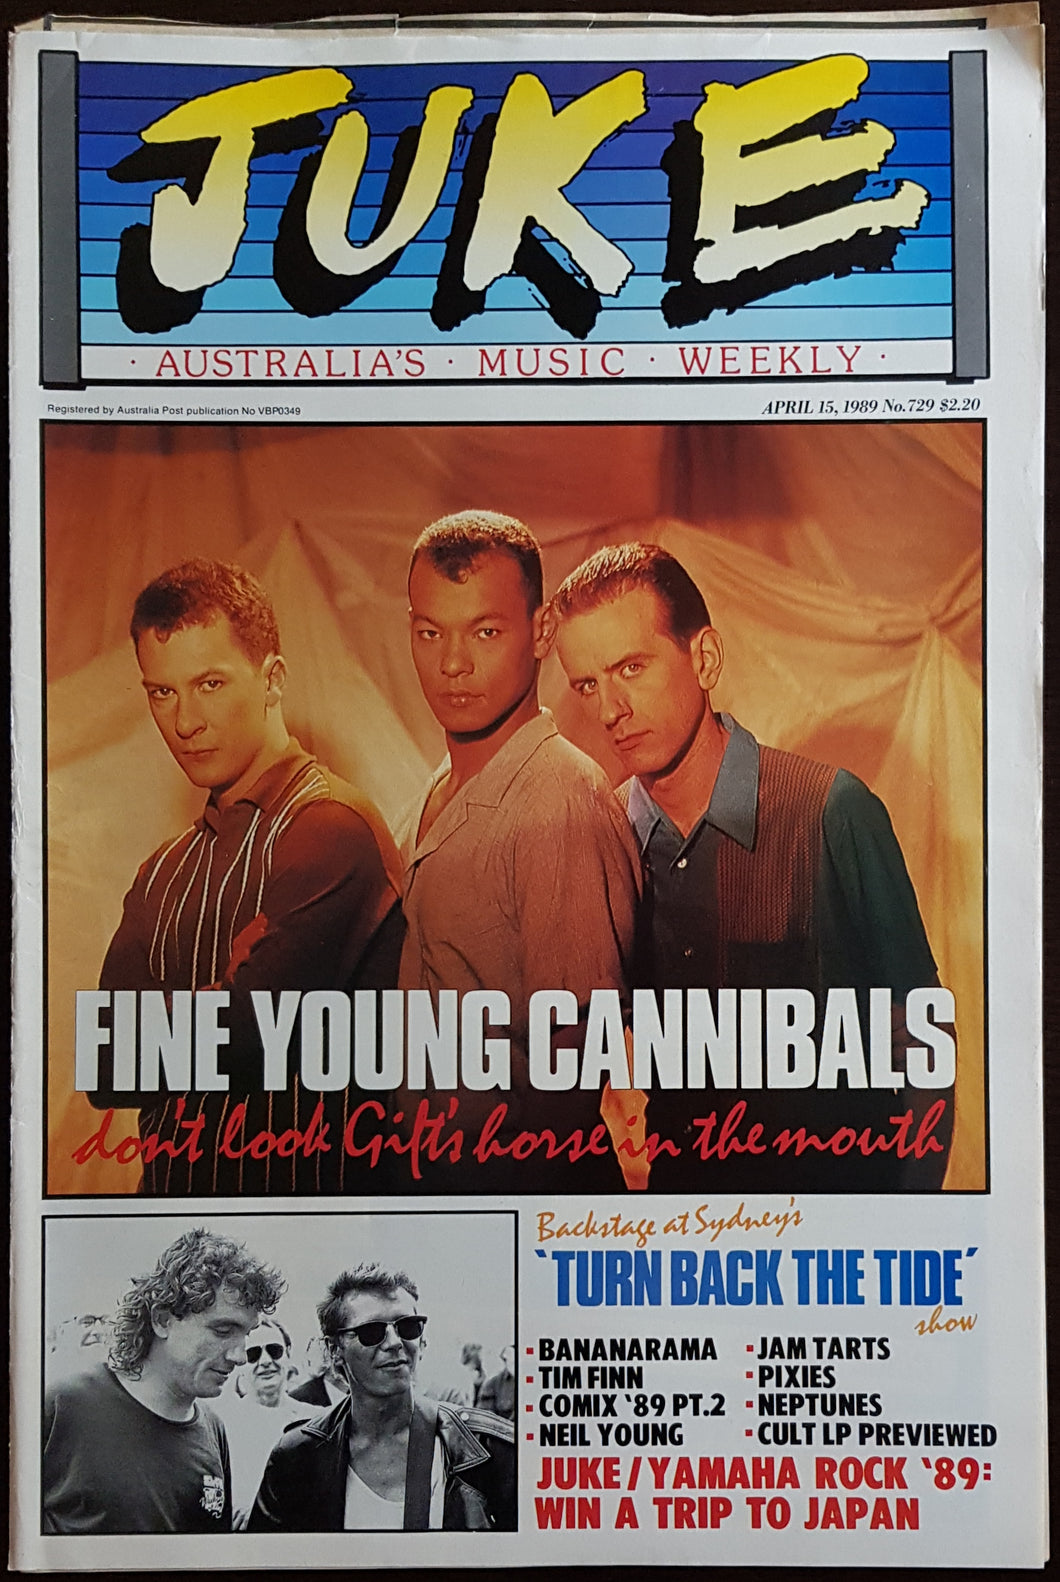 Fine Young Cannibals - Juke April 15, 1989. Issue No.729